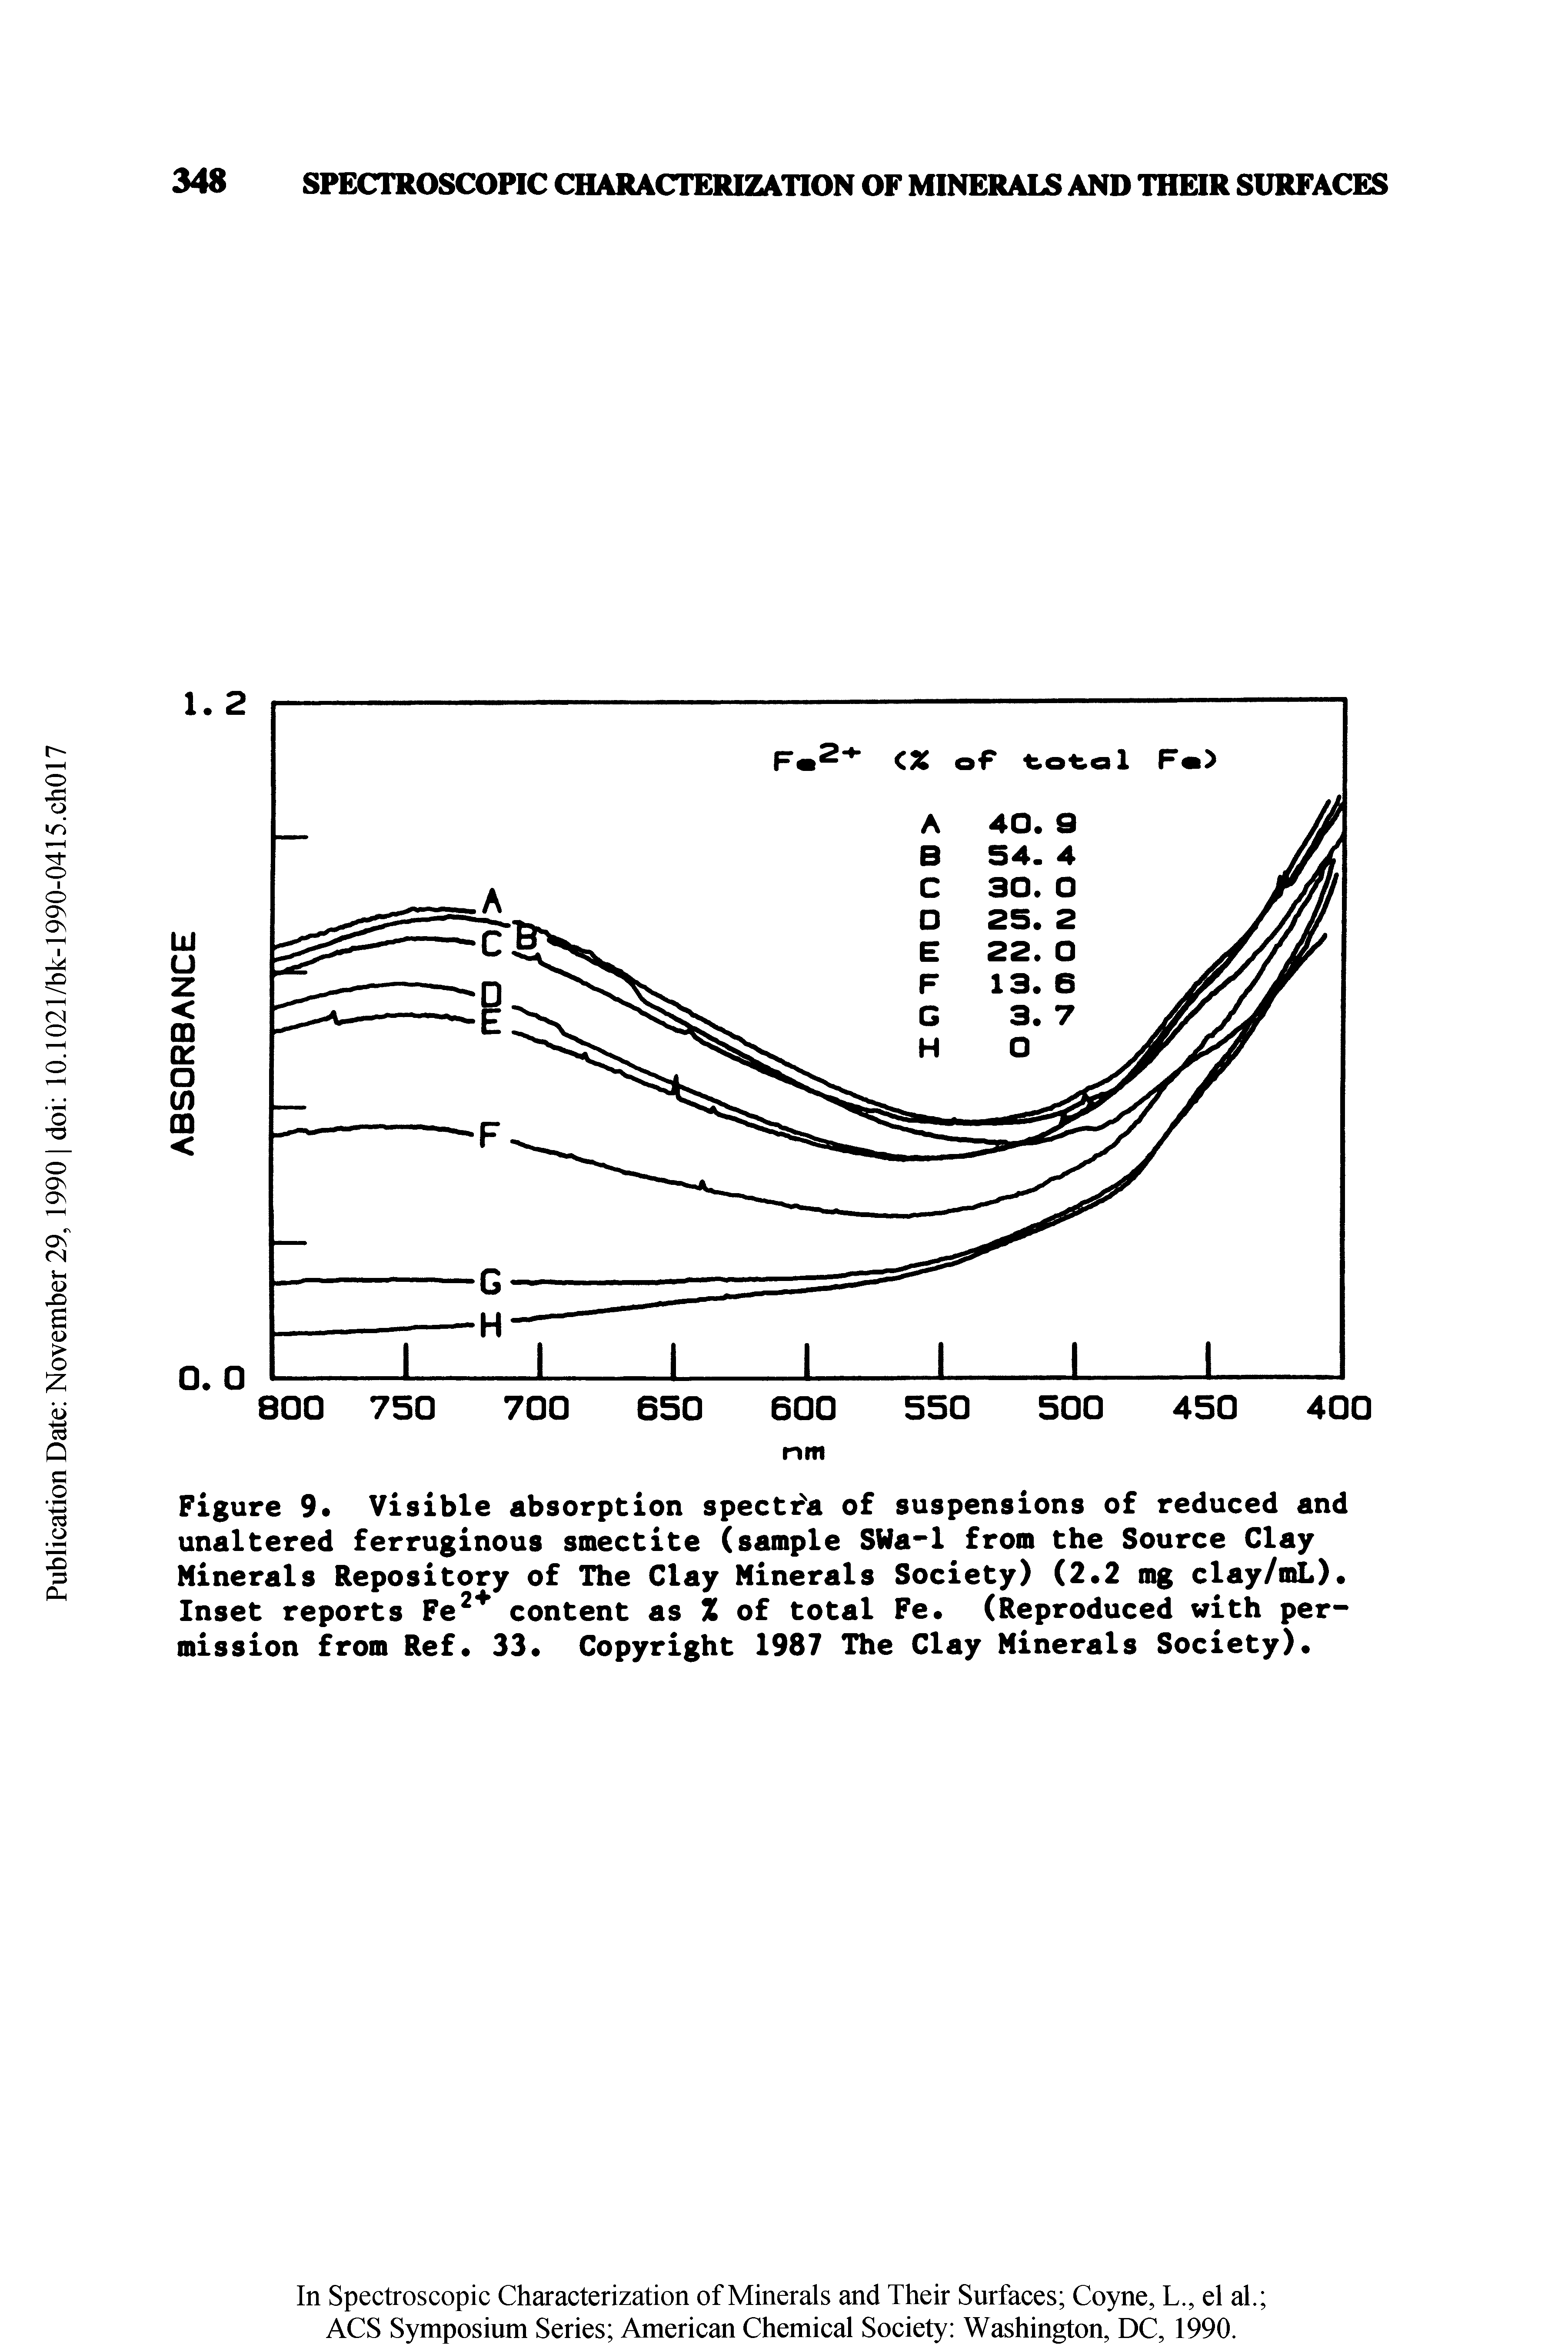 Figure 9 Visible absorption spectra of suspensions of reduced and unaltered ferruginous smectite (sample SWa-1 from the Source Clay Minerals Repository of The Clay Minerals Society) (2.2 mg clay/mL). Inset reports Fe2 content as Z of total Fe. (Reproduced with permission from Ref. 33. Copyright 1987 The Clay Minerals Society).